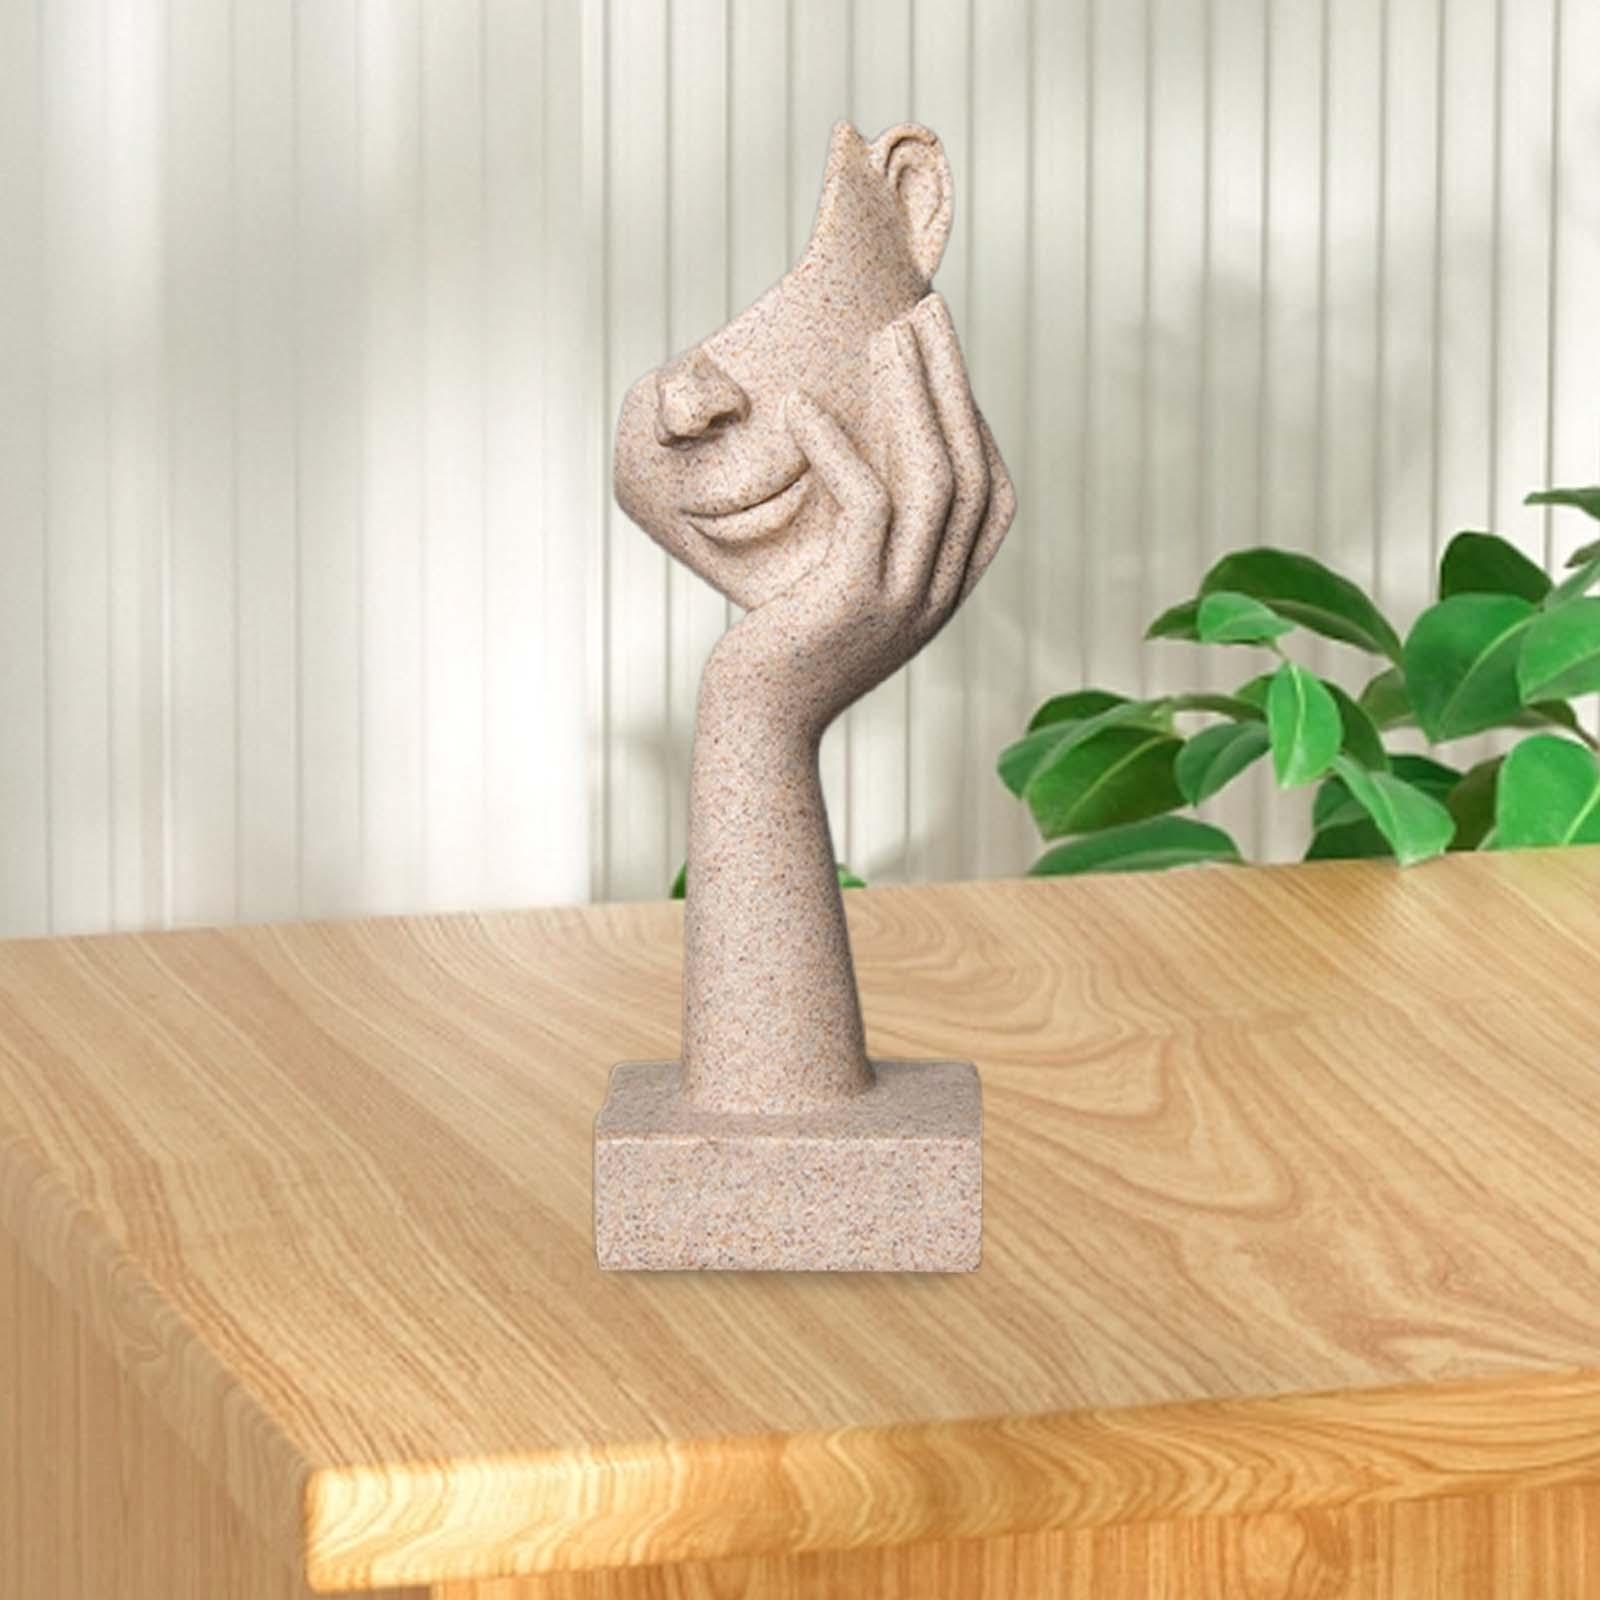 Abstract Art Figurine European Ornament Resin Statue for Desktop Office Home style C